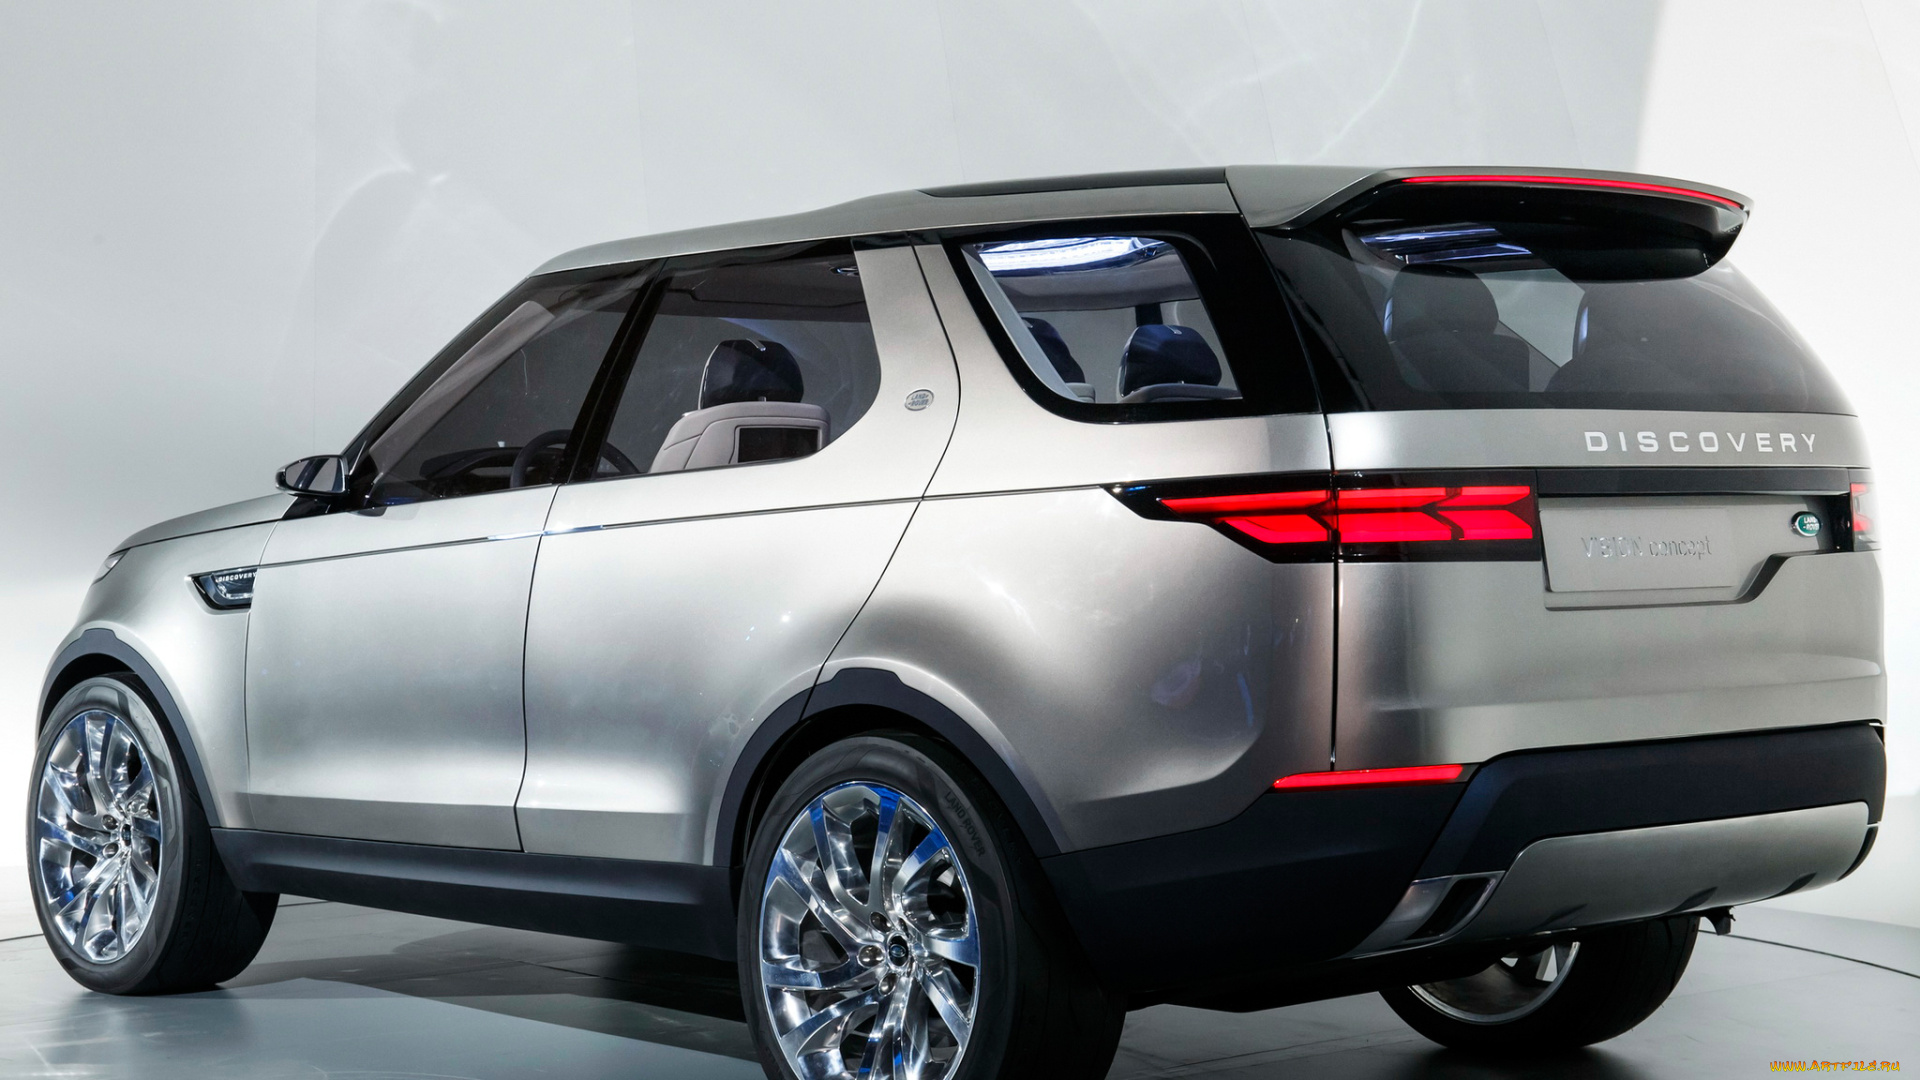 автомобили, land-rover, land, rover, discovery, vision, светлый, 2014г, concept